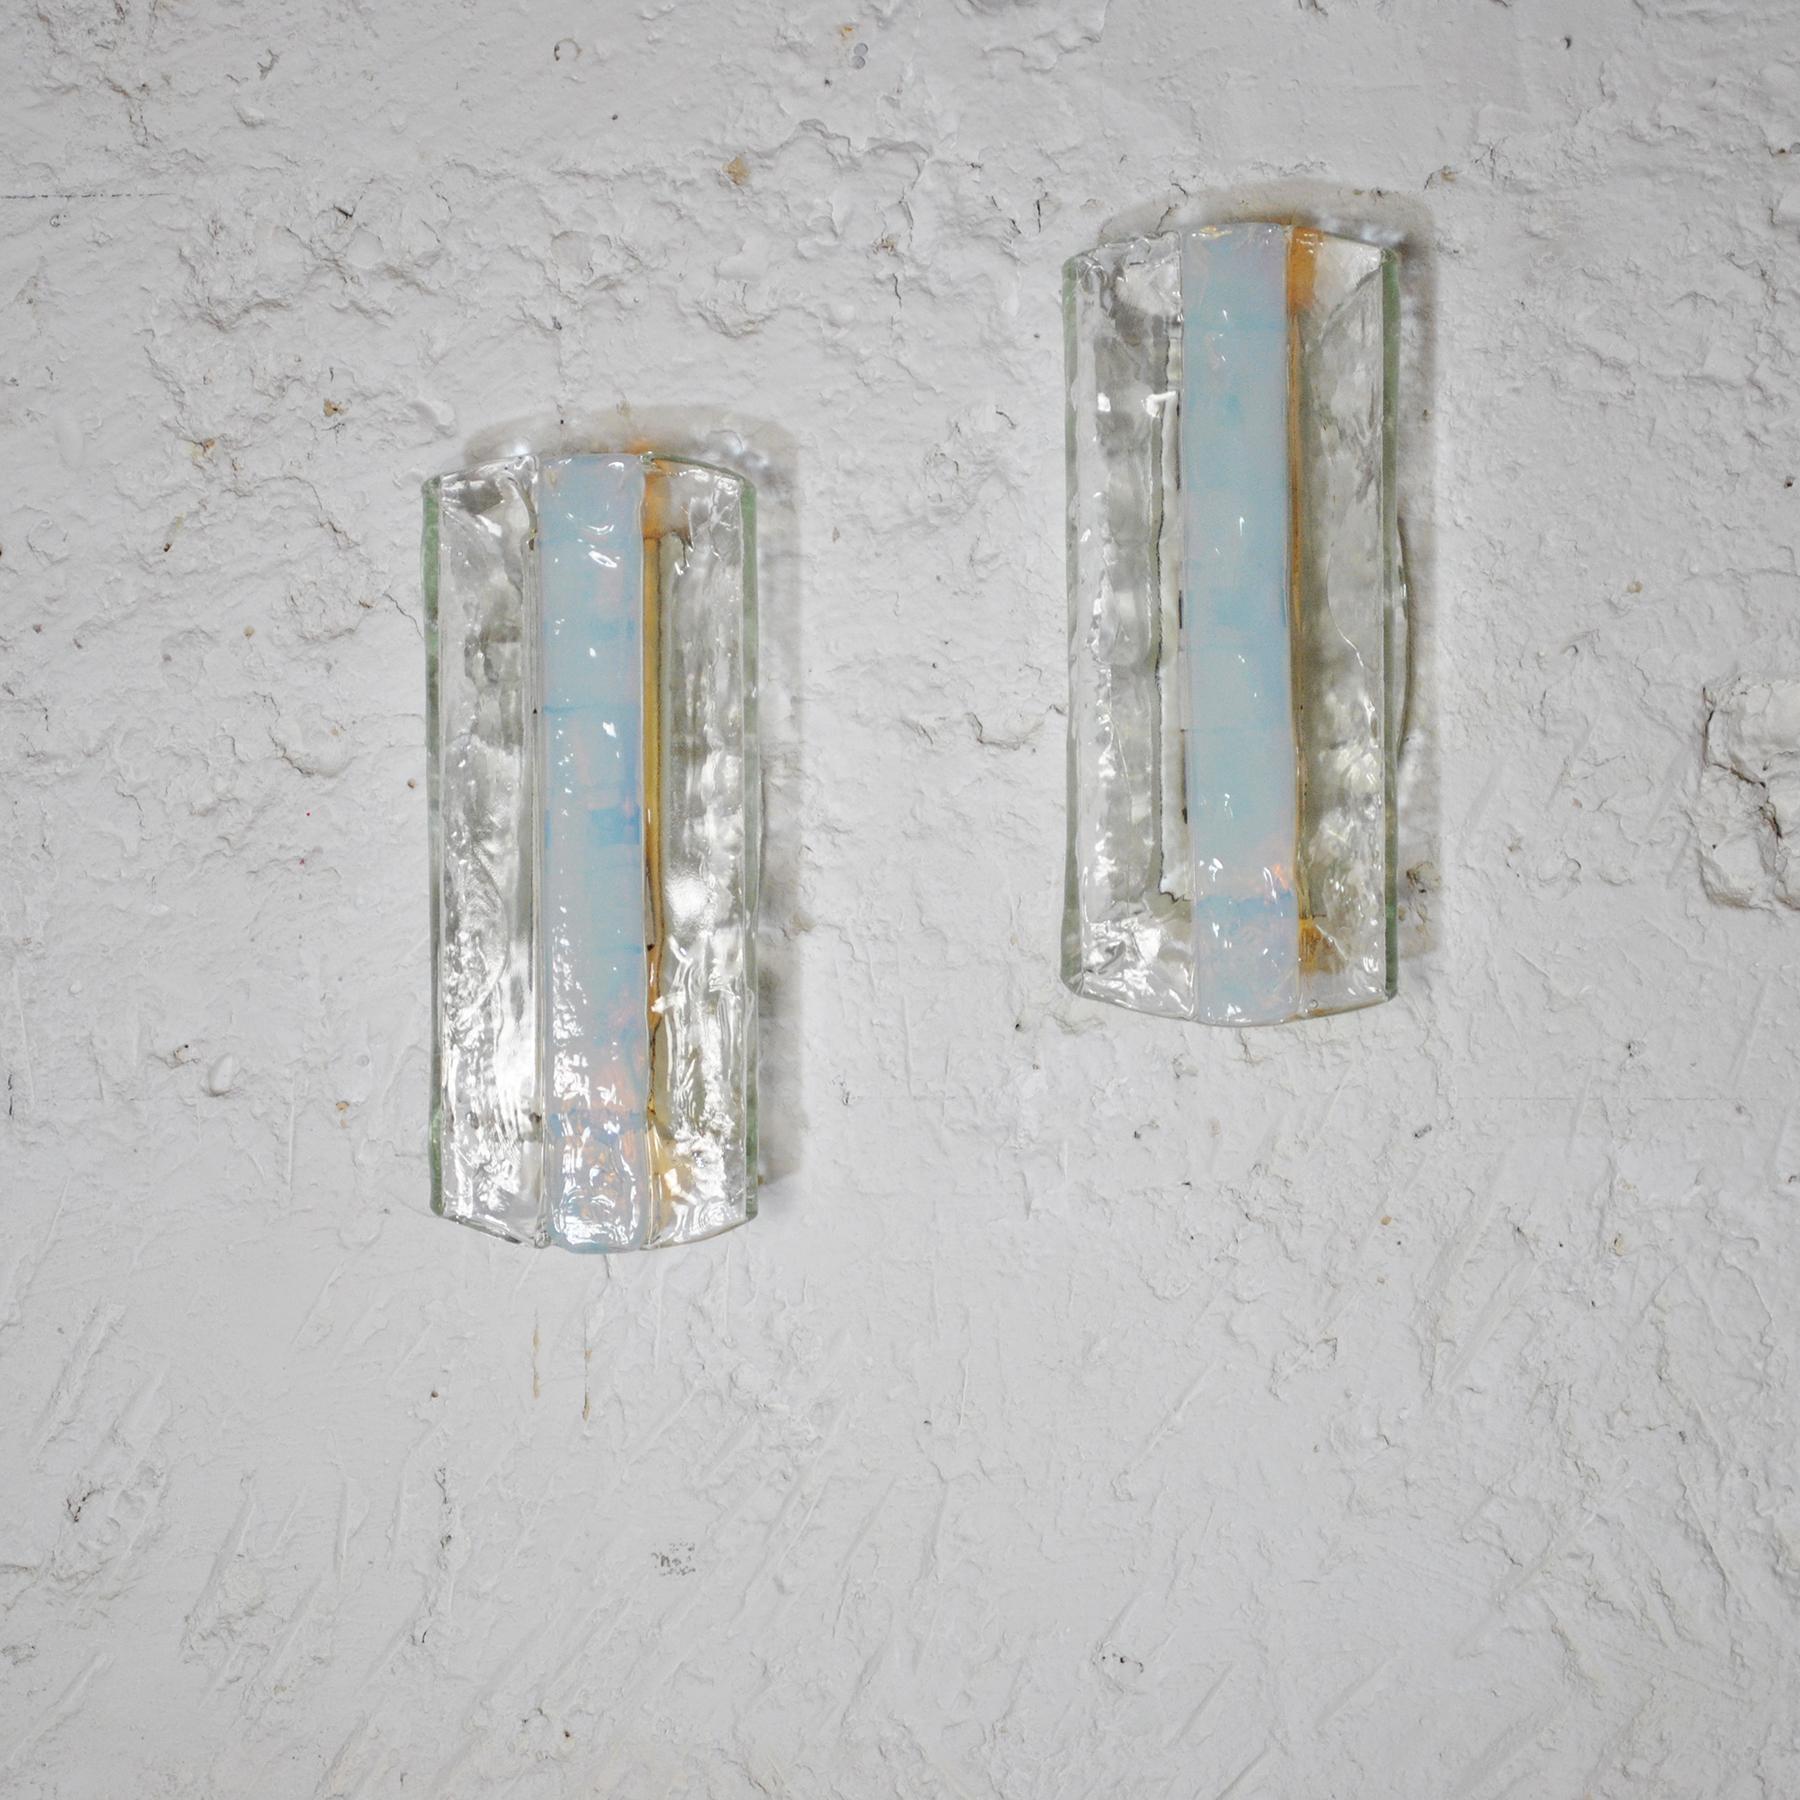 Set of two Mazzega sconces by Venetian glass-blowing firm A.V. Mazzega. Clear textured glass has a strip of fused, green-ish blue, opalescent glass applied down the center of each sconce beautiful, watery, tones.